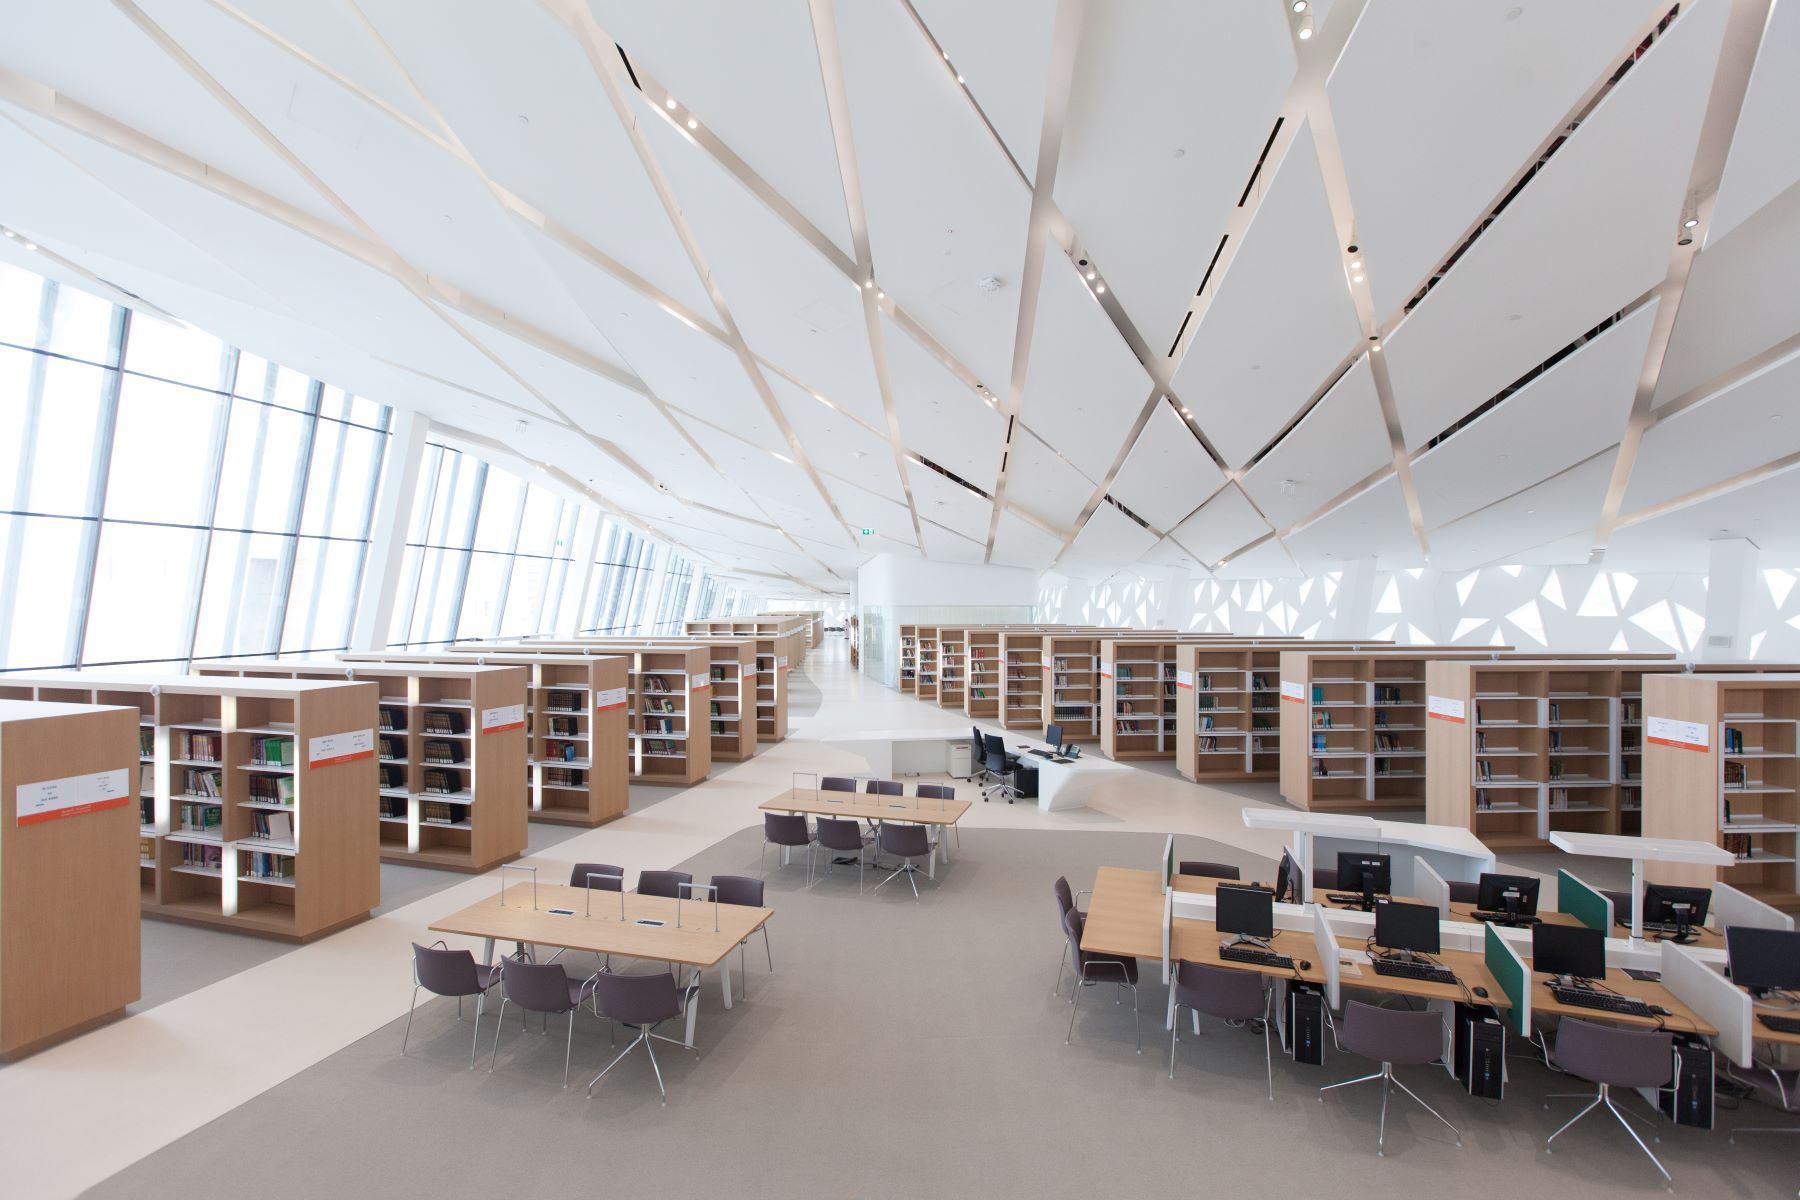 14-mind-blowing-facts-about-qatar-faculty-of-islamic-studies-library